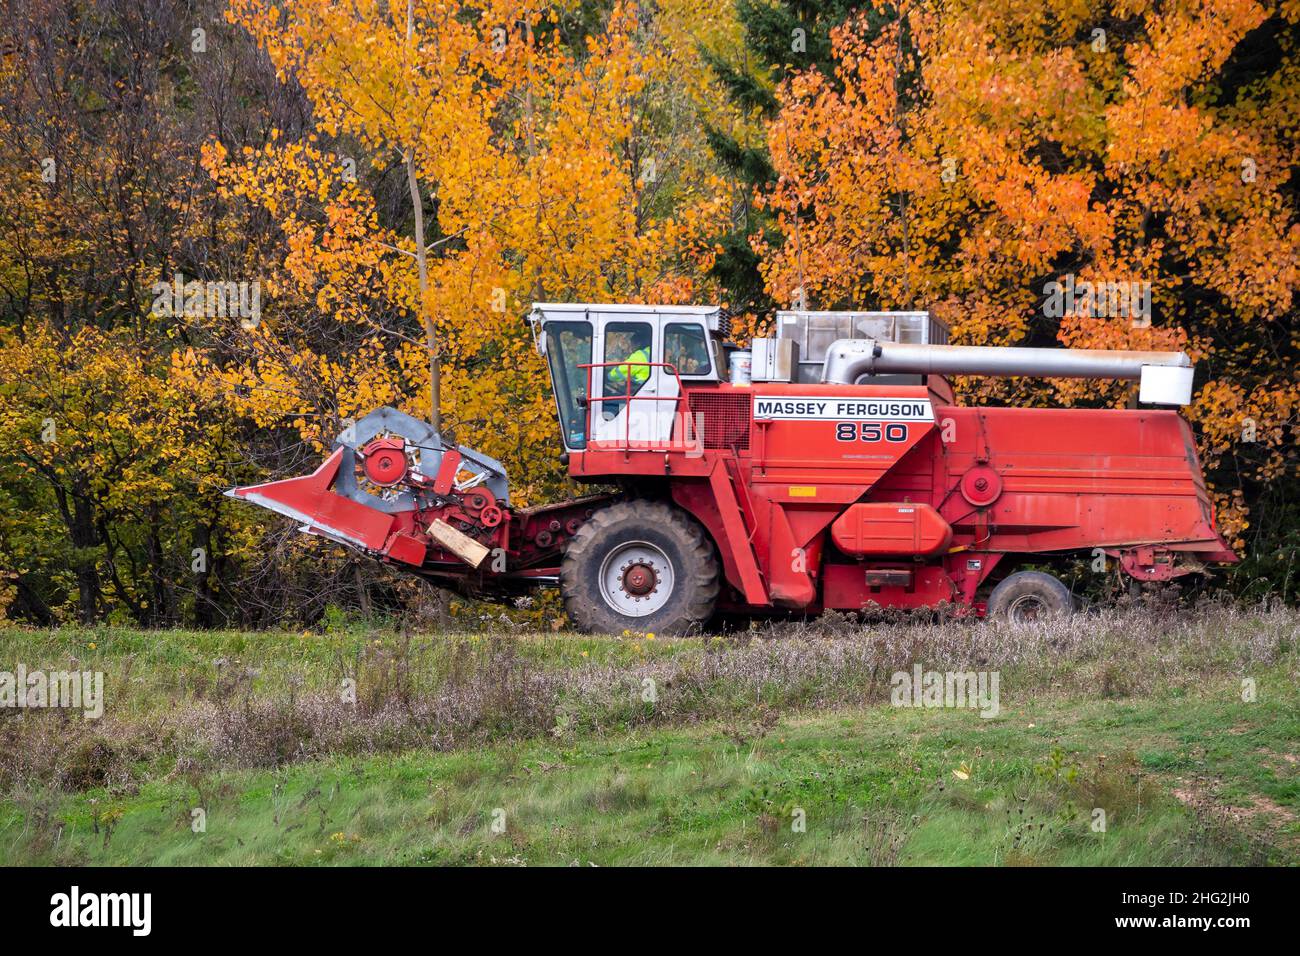 Massey Ferguson Combine Harvester Model 850, driving past autumn leaves along a country road. Stock Photo